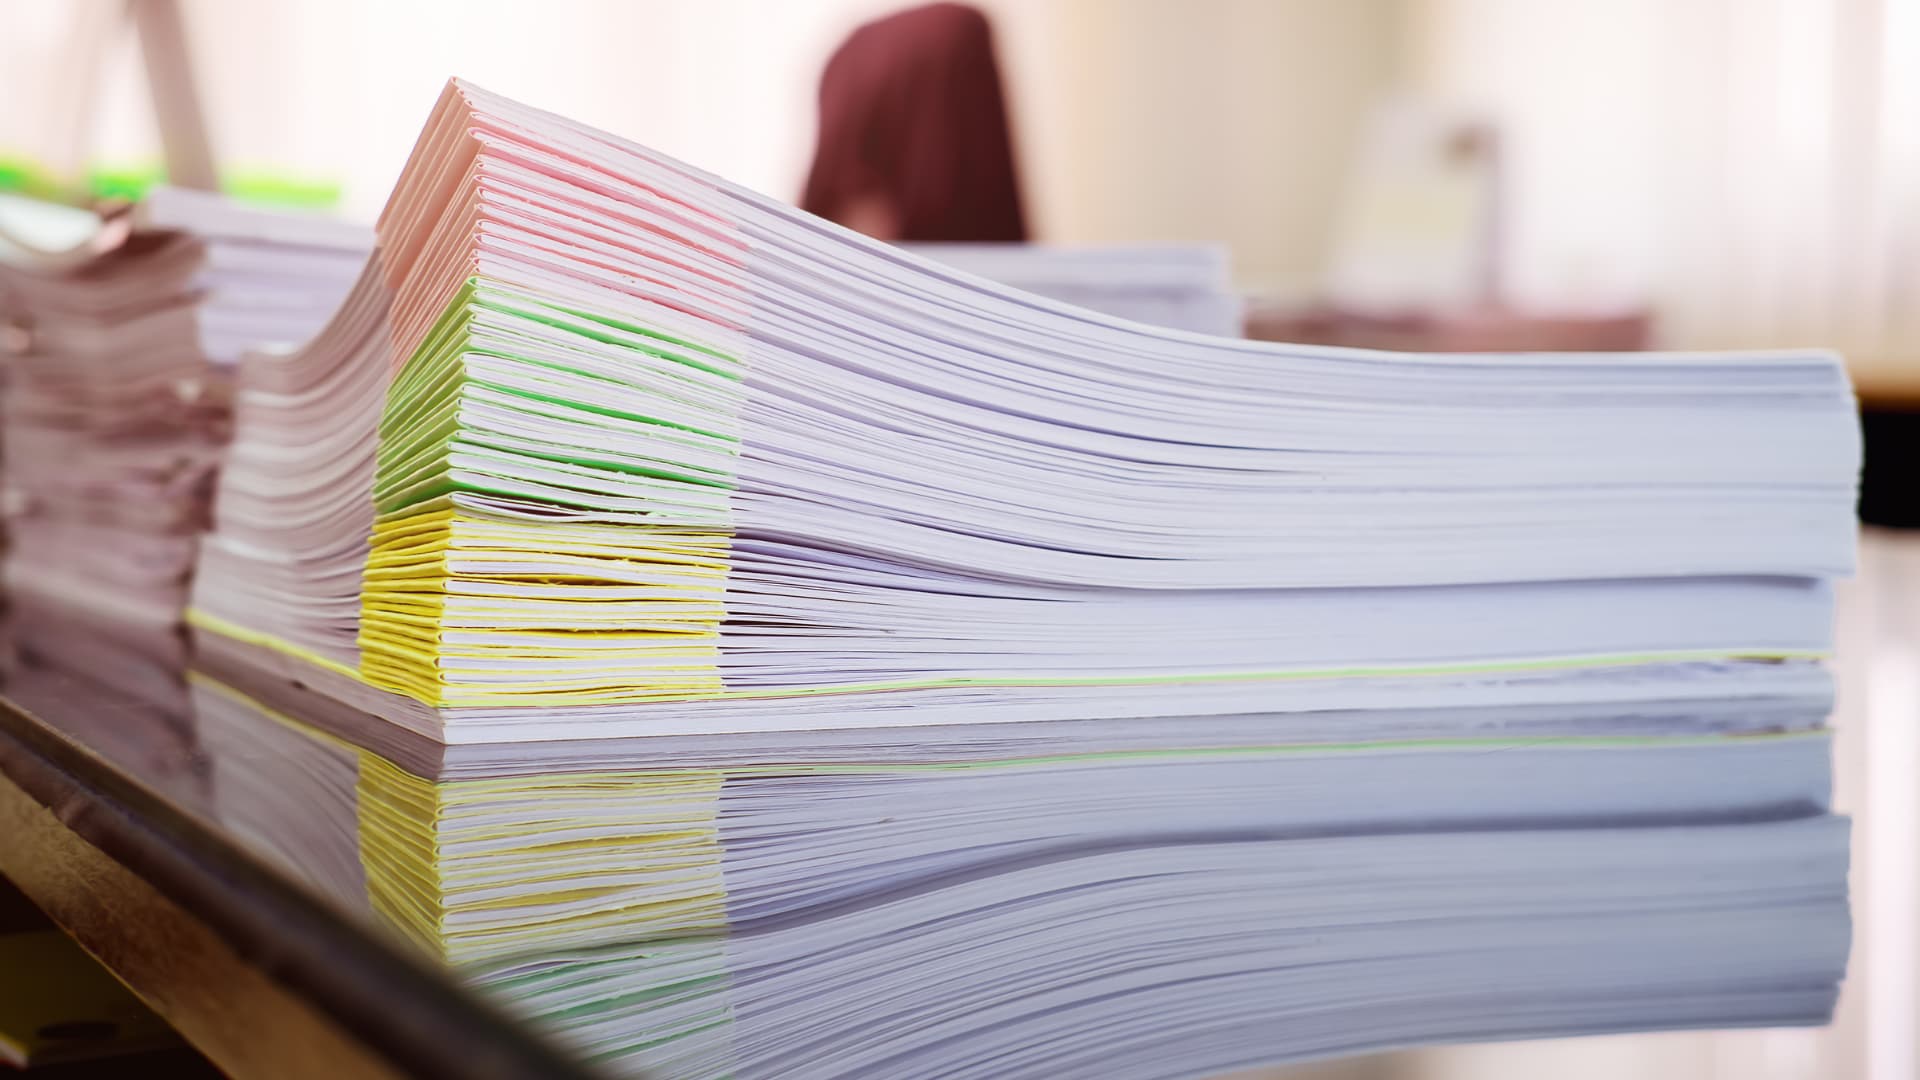 An image of Florida Annual Report documents ready for filing at a law firm.